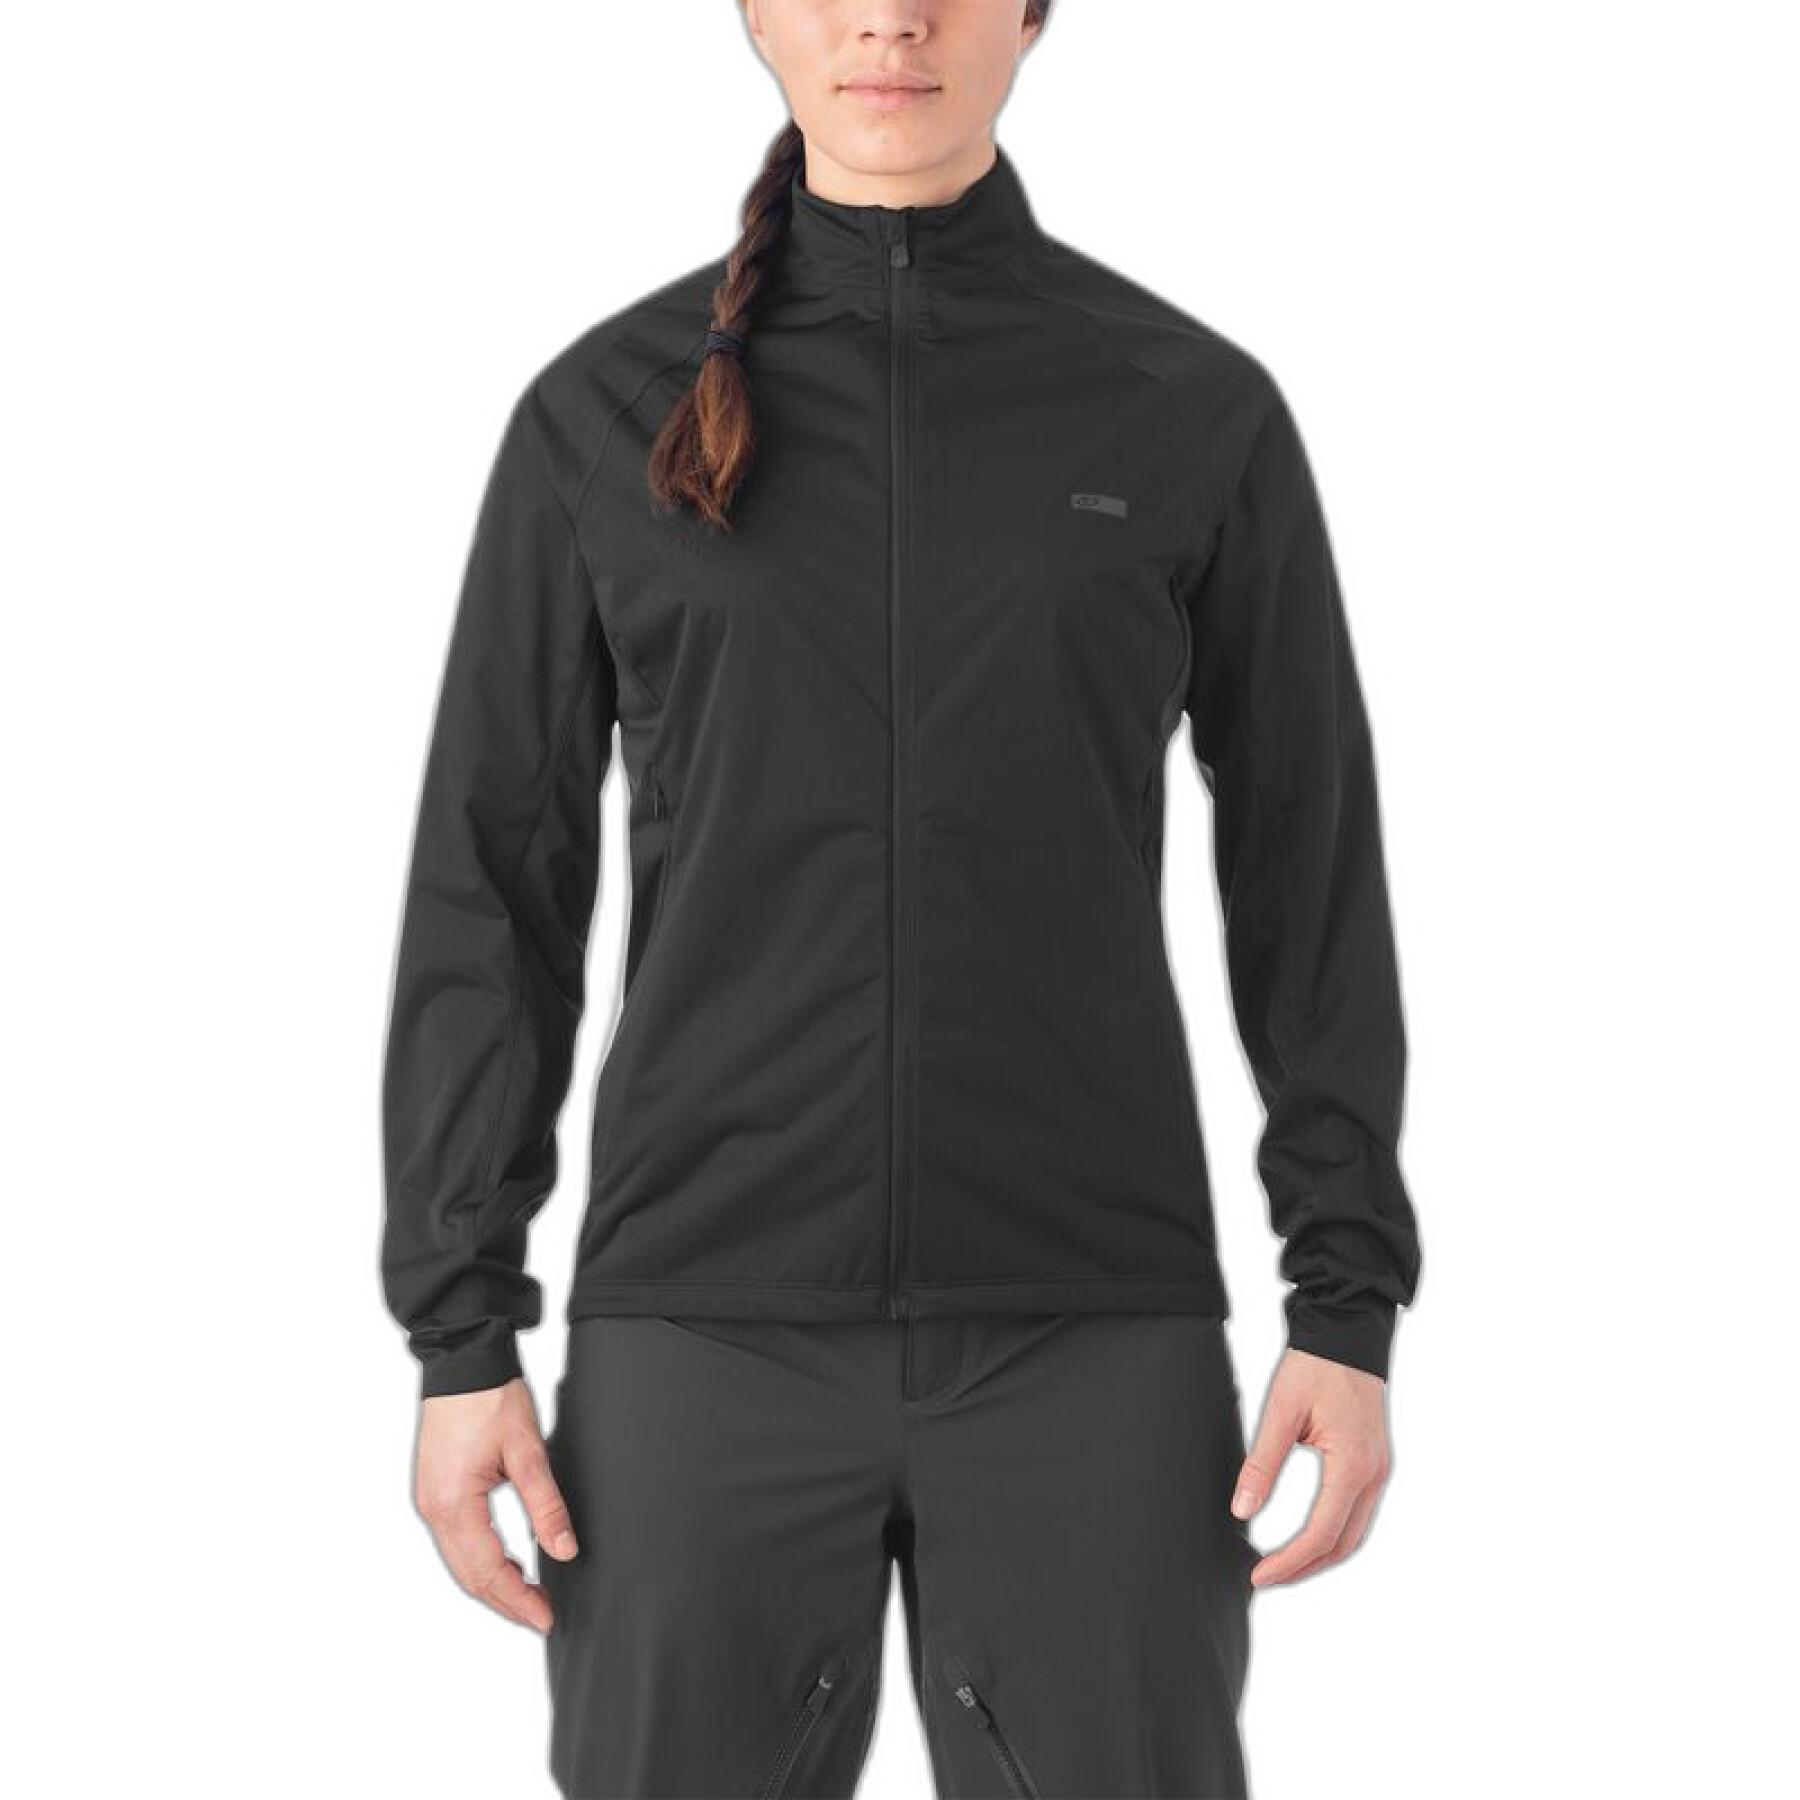 Chaqueta impermeable mujer Giro Stow H2O